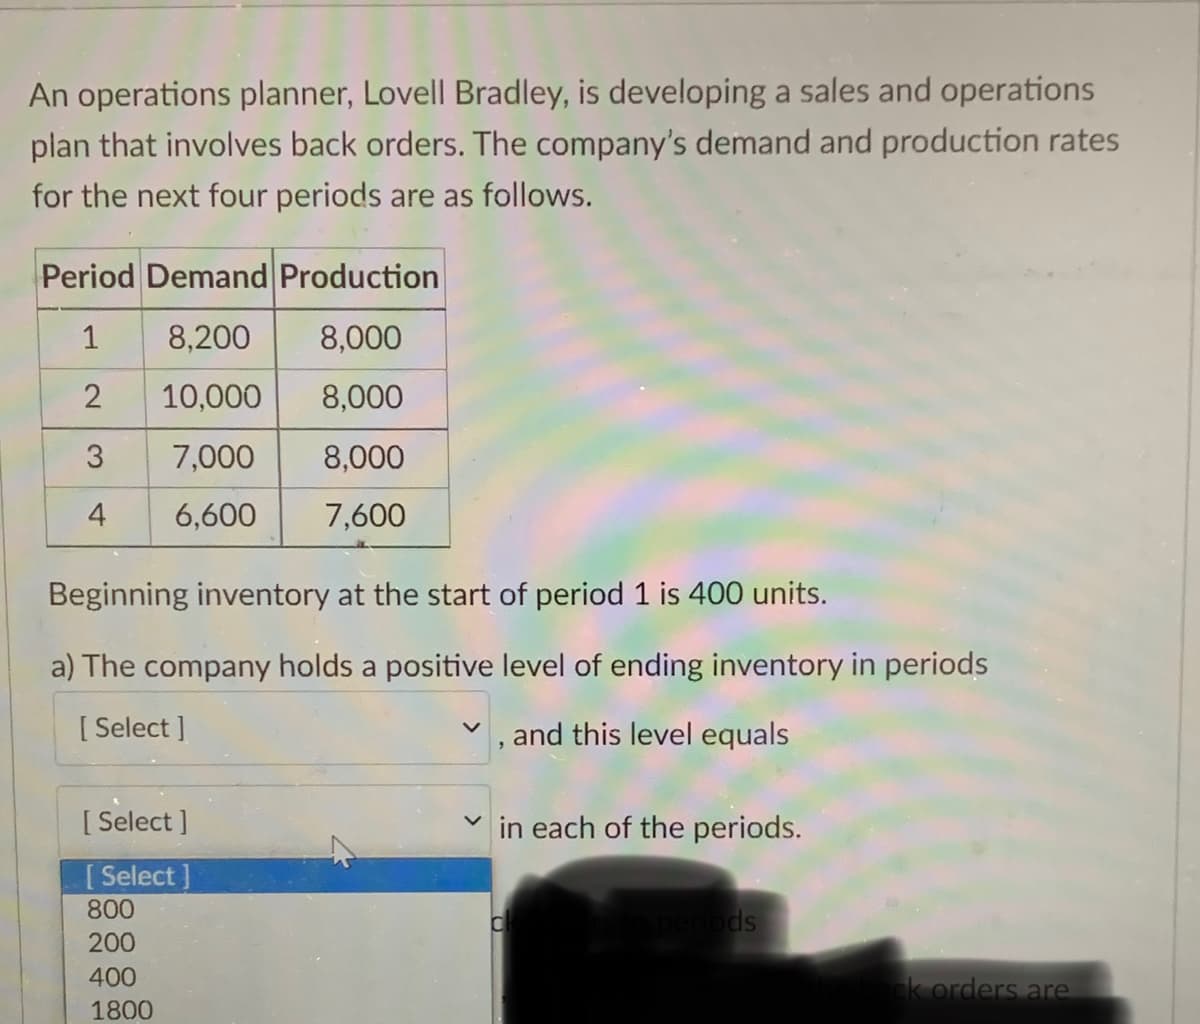 An operations planner, Lovell Bradley, is developing a sales and operations
plan that involves back orders. The company's demand and production rates
for the next four periods are as follows.
Period Demand Production
1
8,200
8,000
2
10,000
8,000
3
7,000
8,000
4
6,600
7,600
Beginning inventory at the start of period 1 is 400 units.
a) The company holds a positive level of ending inventory in periods
[Select]
✓, and this level equals
[Select]
[Select]
800
200
400
1800
in each of the periods.
C
periods
ack orders are